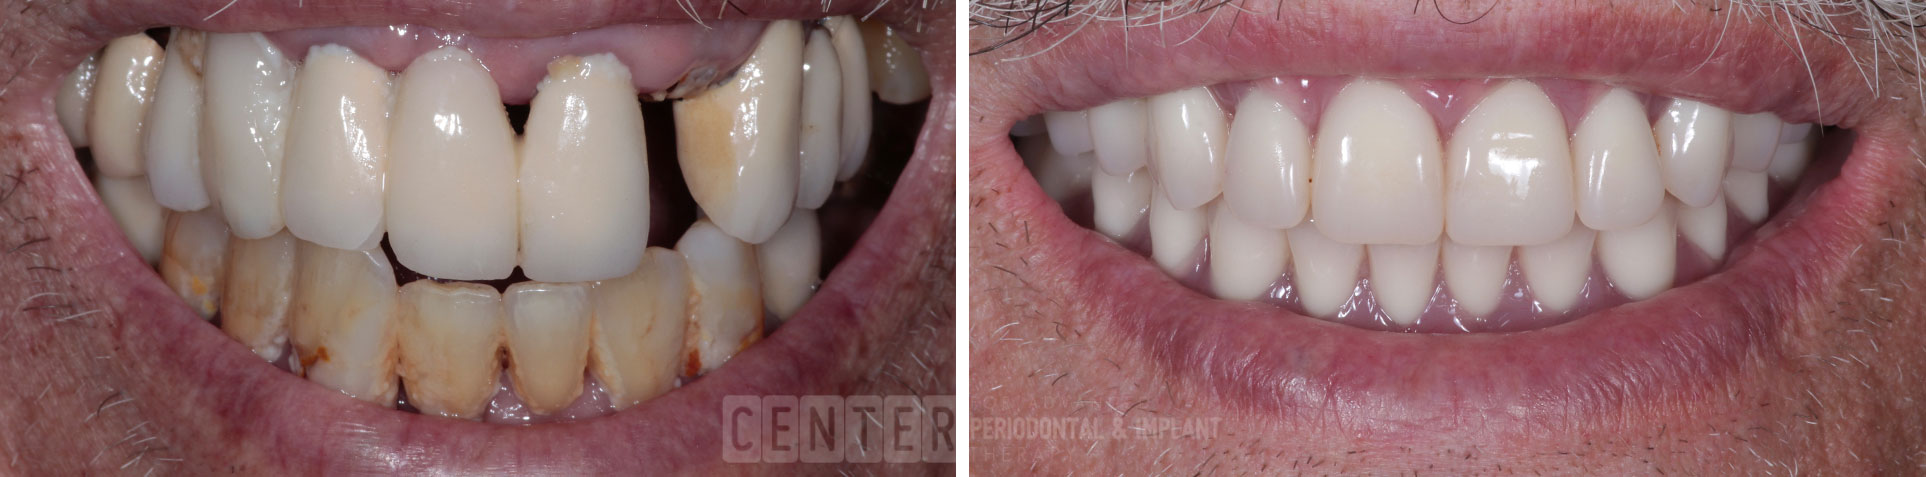 single tooth implant before after